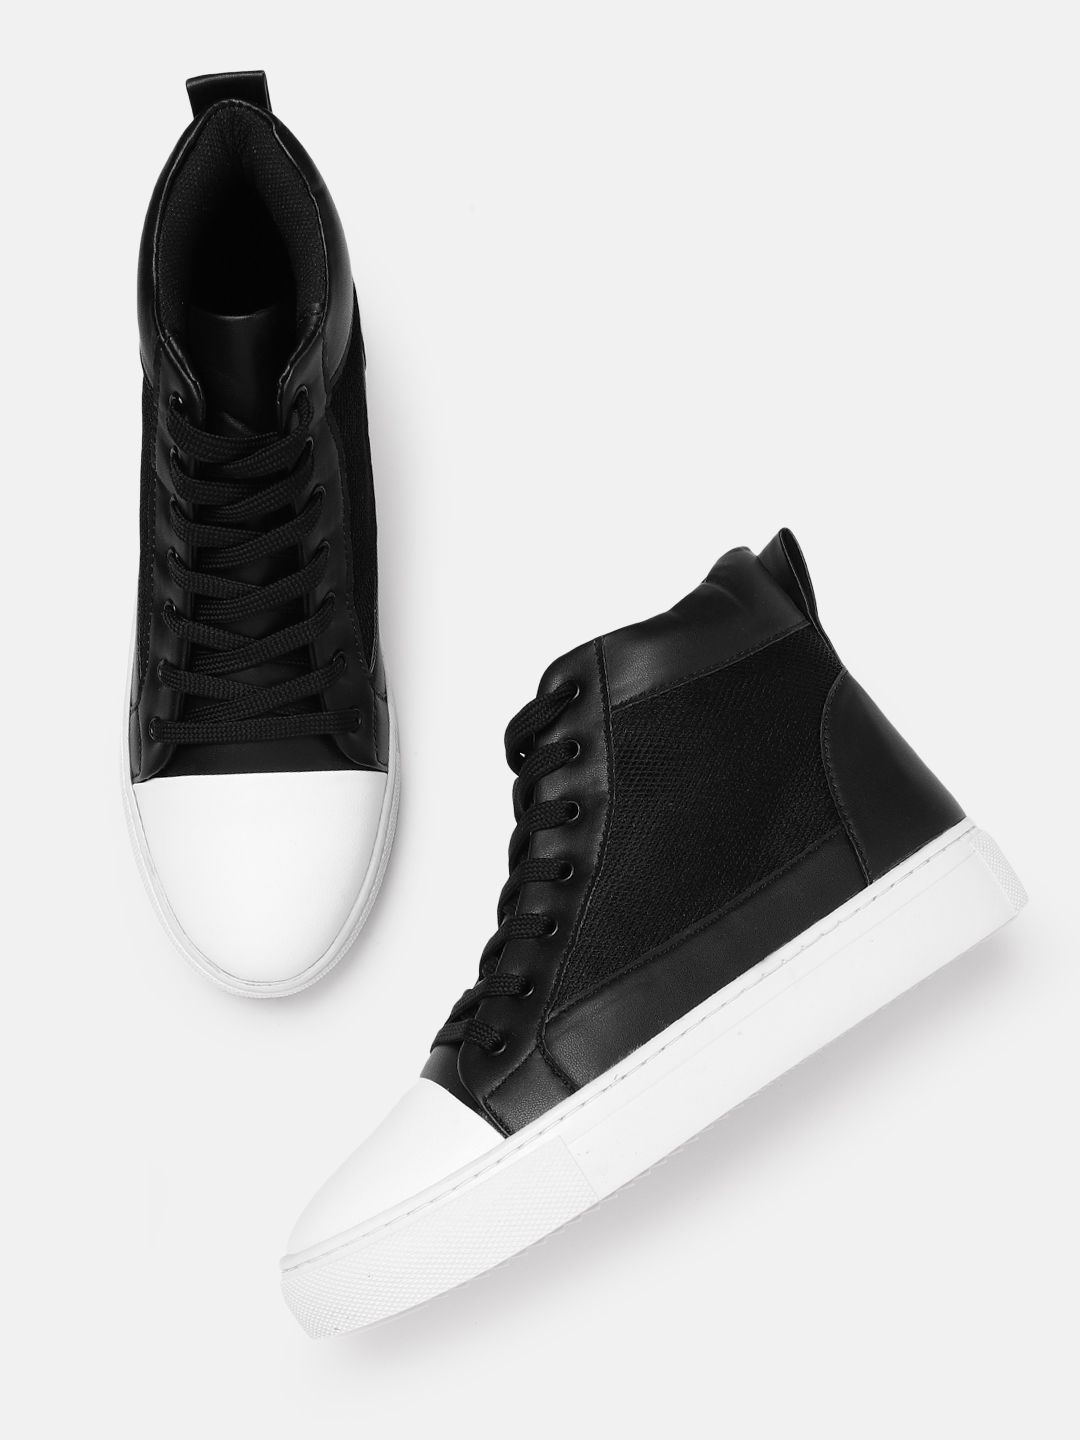 Roadster Women Black & White Colourblocked Mid-Top Sneakers Price in India